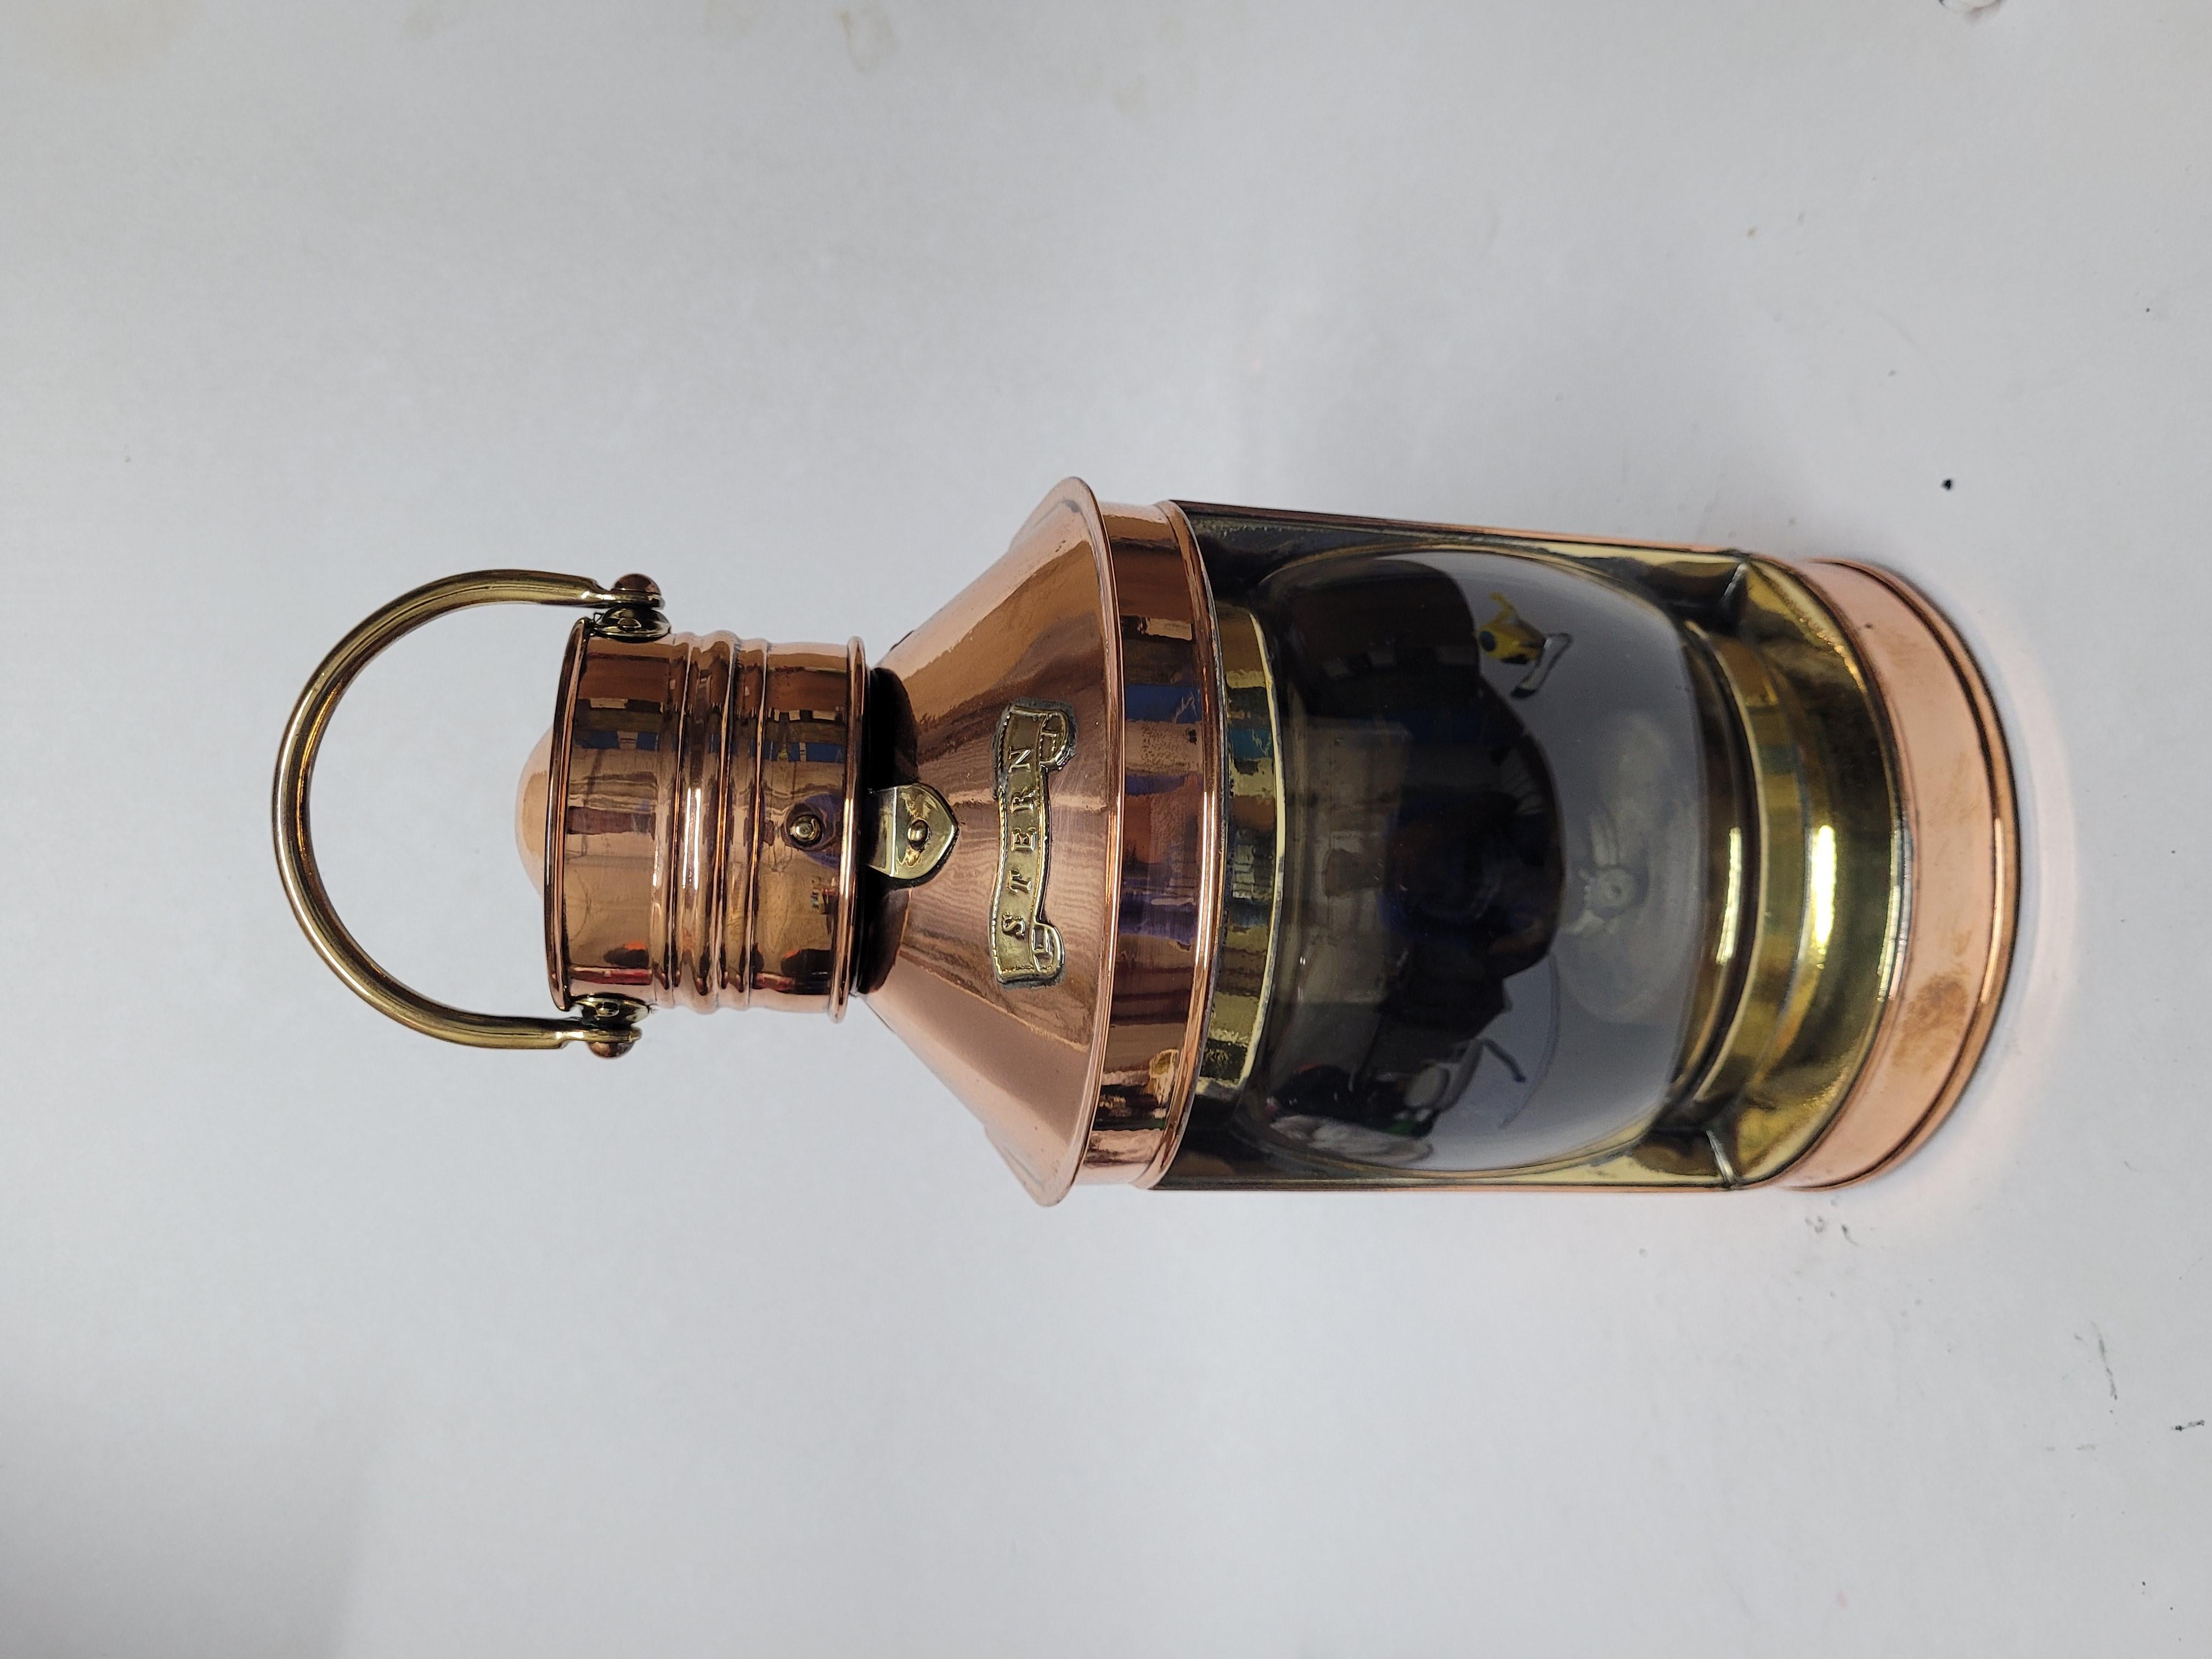 Awesome polished cooper ships lantern by Davey of London. With brass stern badge, lens bezel, makers badge and carry handle. Fitted with original burner. Makers badge reads Davey and Company London 38 West India Dock Road. Choice English marine